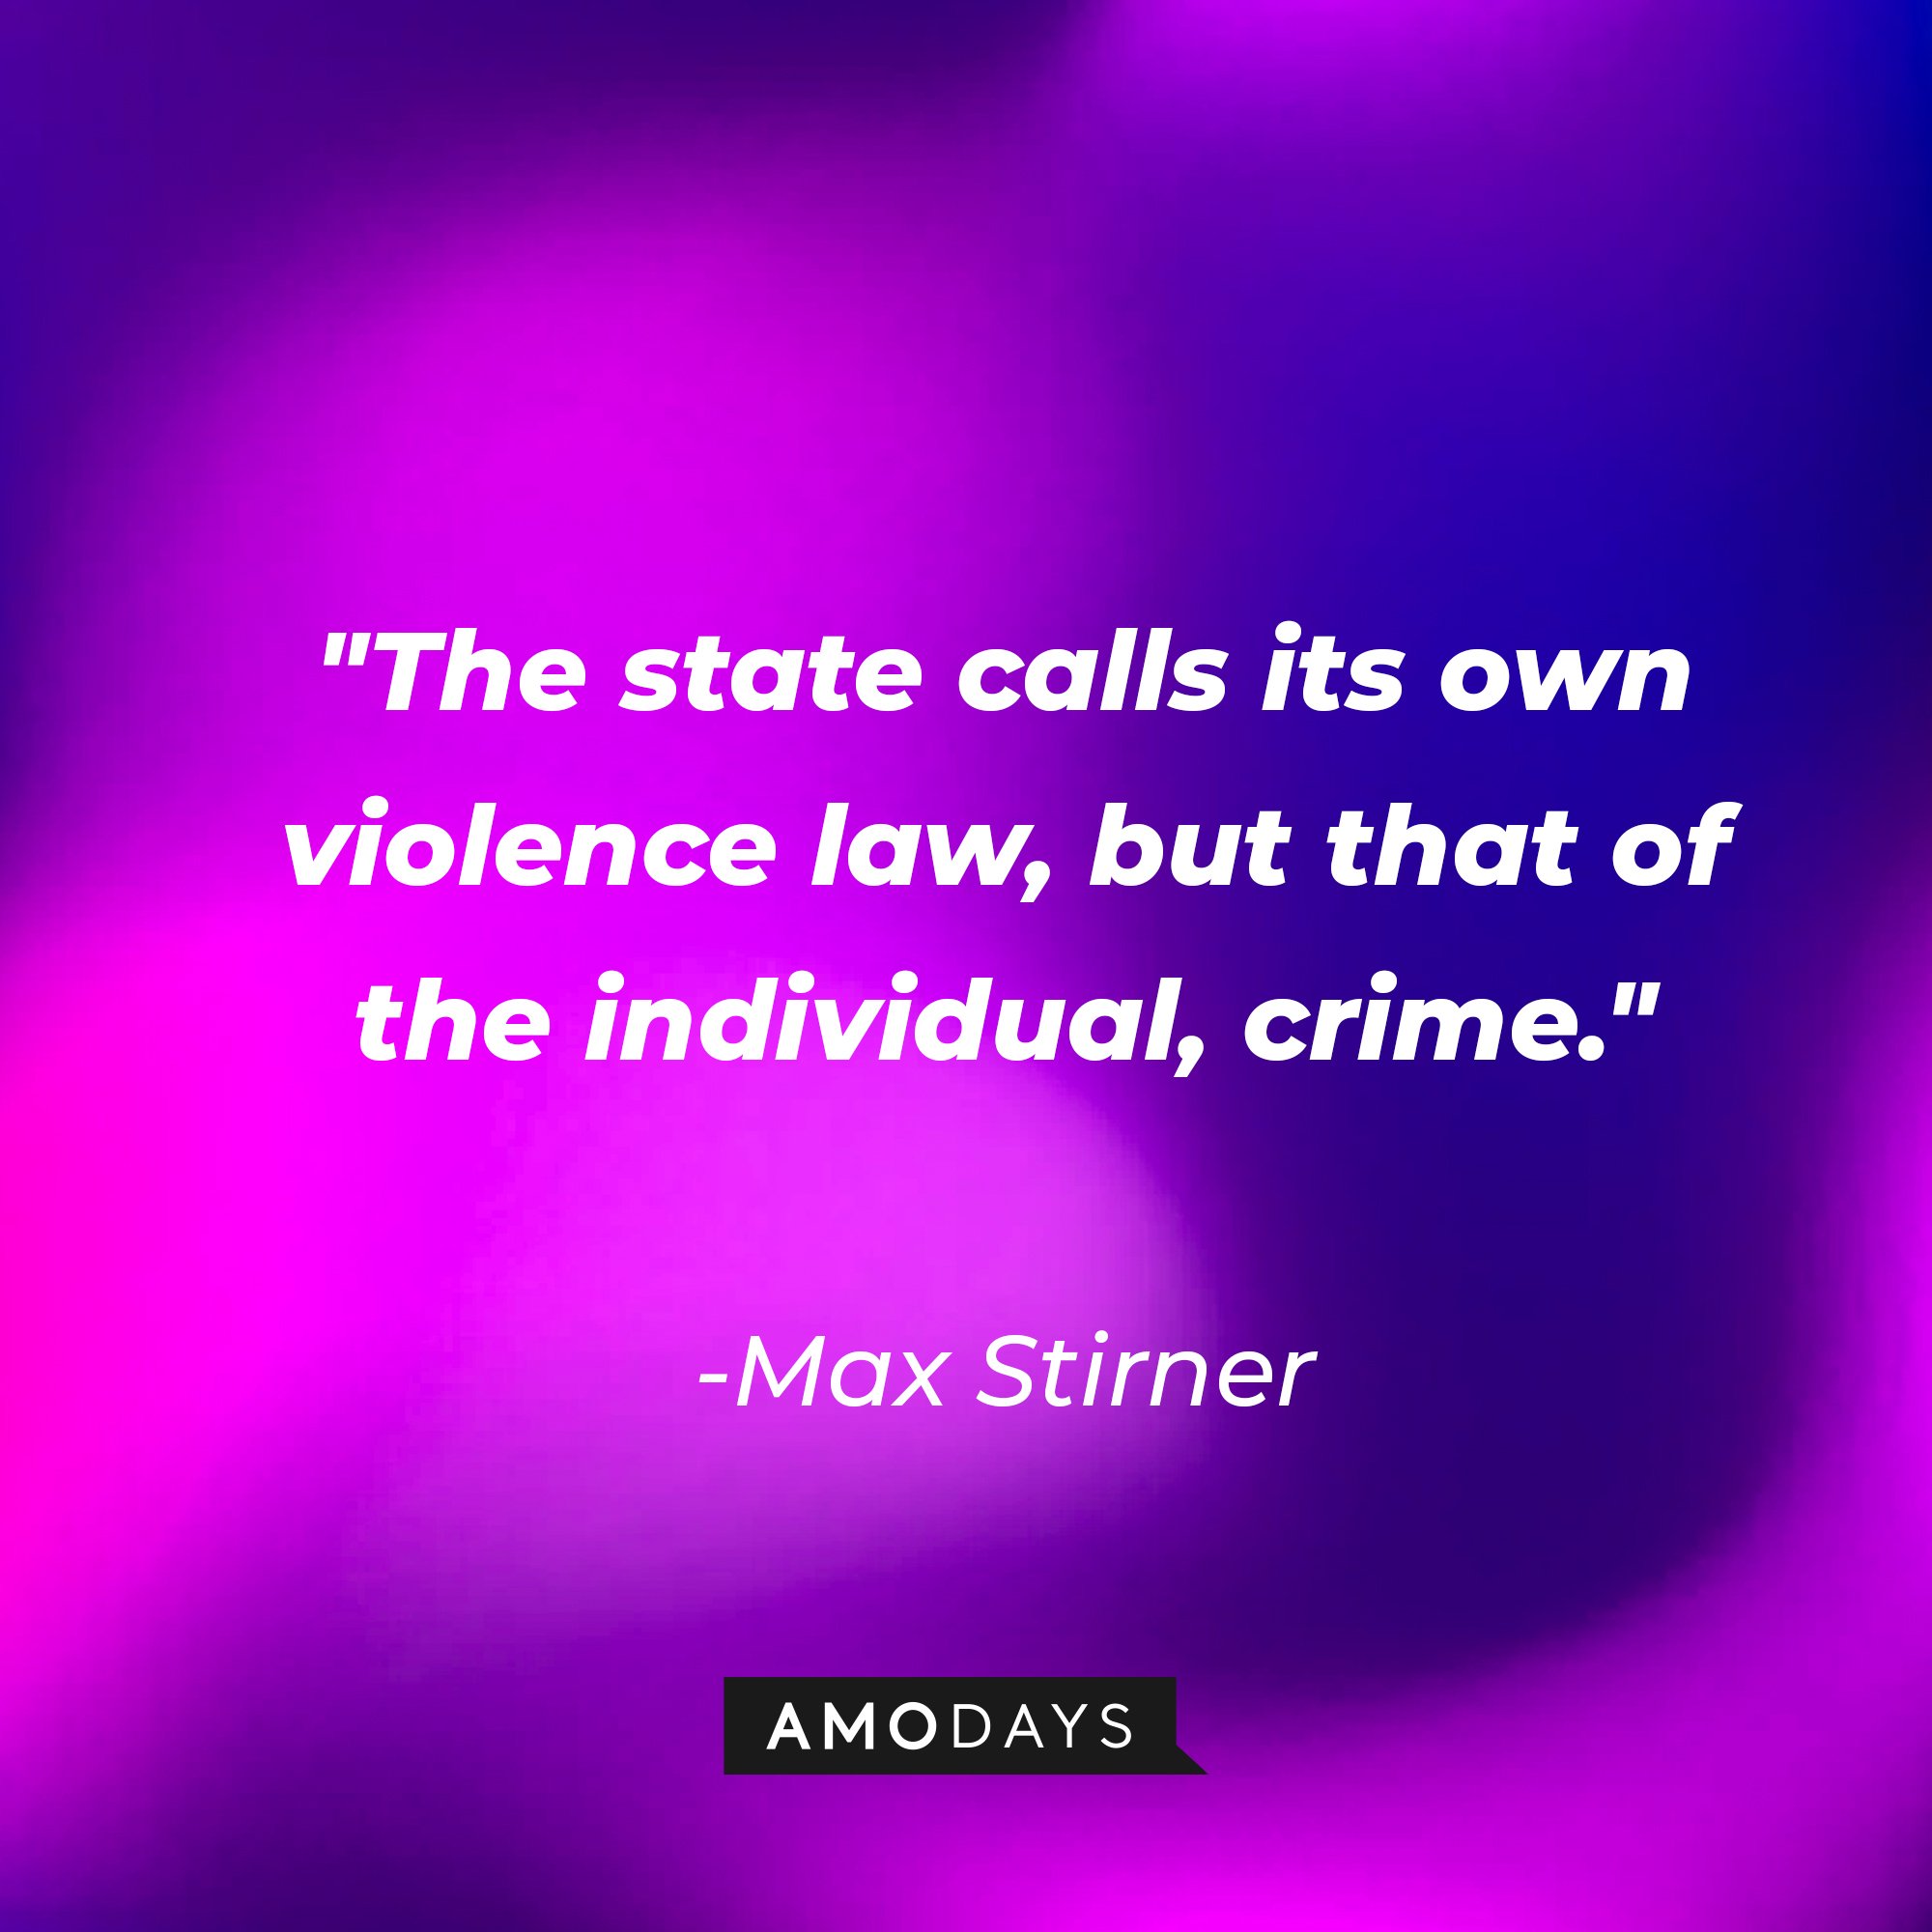 Max Stirner's quote:\\\\\\\\\\\\\\\\u00a0"The state calls its own violence law, but that of the individual, crime."\\\\\\\\\\\\\\\\u00a0| Image: AmoDays